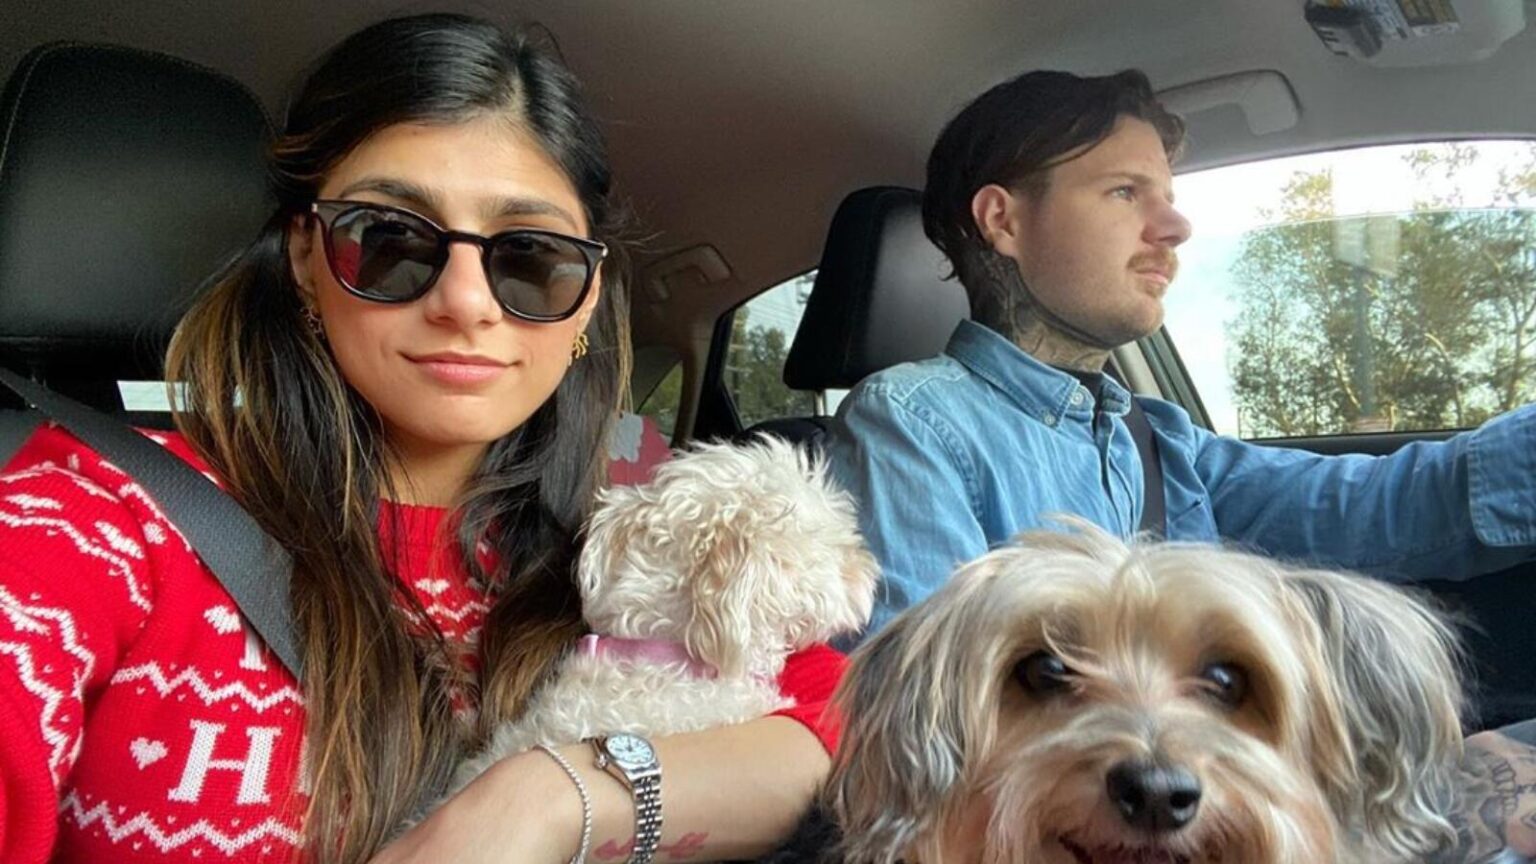 Mia Khalifa could have a new boyfriend and simply be keeping him a secret. Let's dive into the latest rumors.